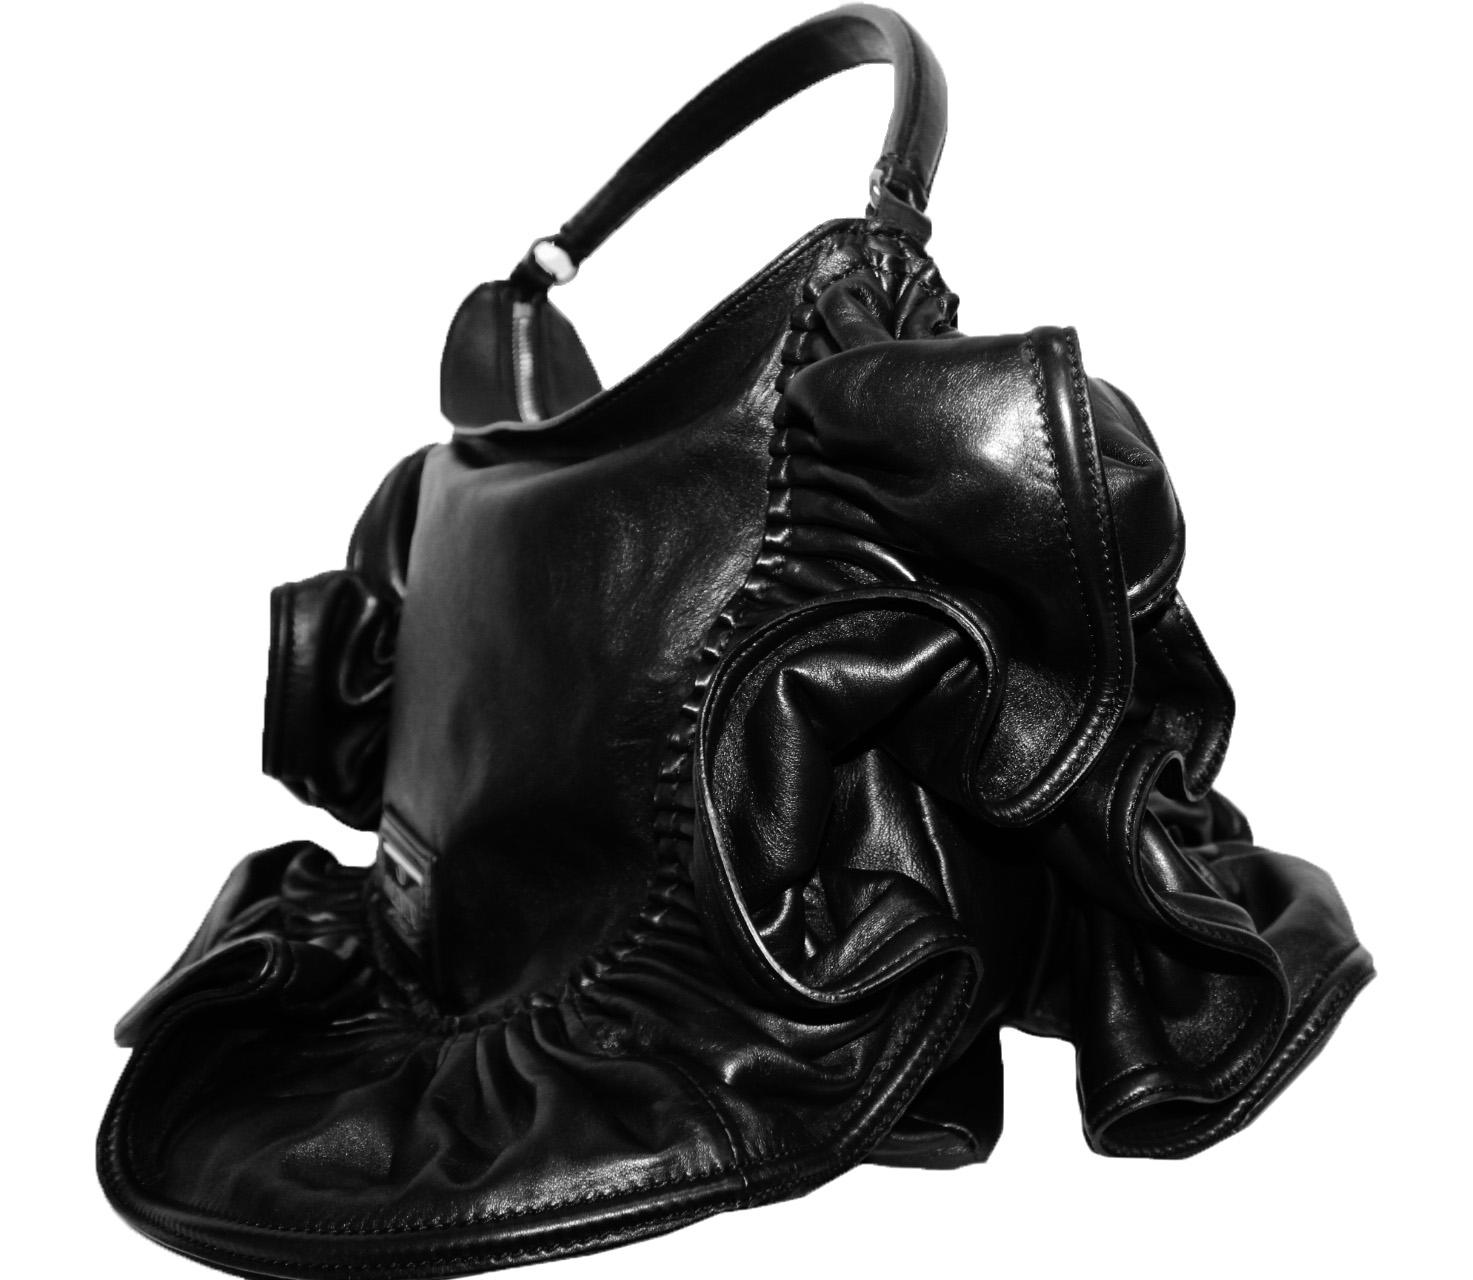 Valentino black leather ruffle frame bag includes a single covered top handle.  This bag is lined in silver tone silk fabric with one side zippered pocket with silk Valentino tag in red.  The bag resembles a Valentino ruffled skirt composed of 